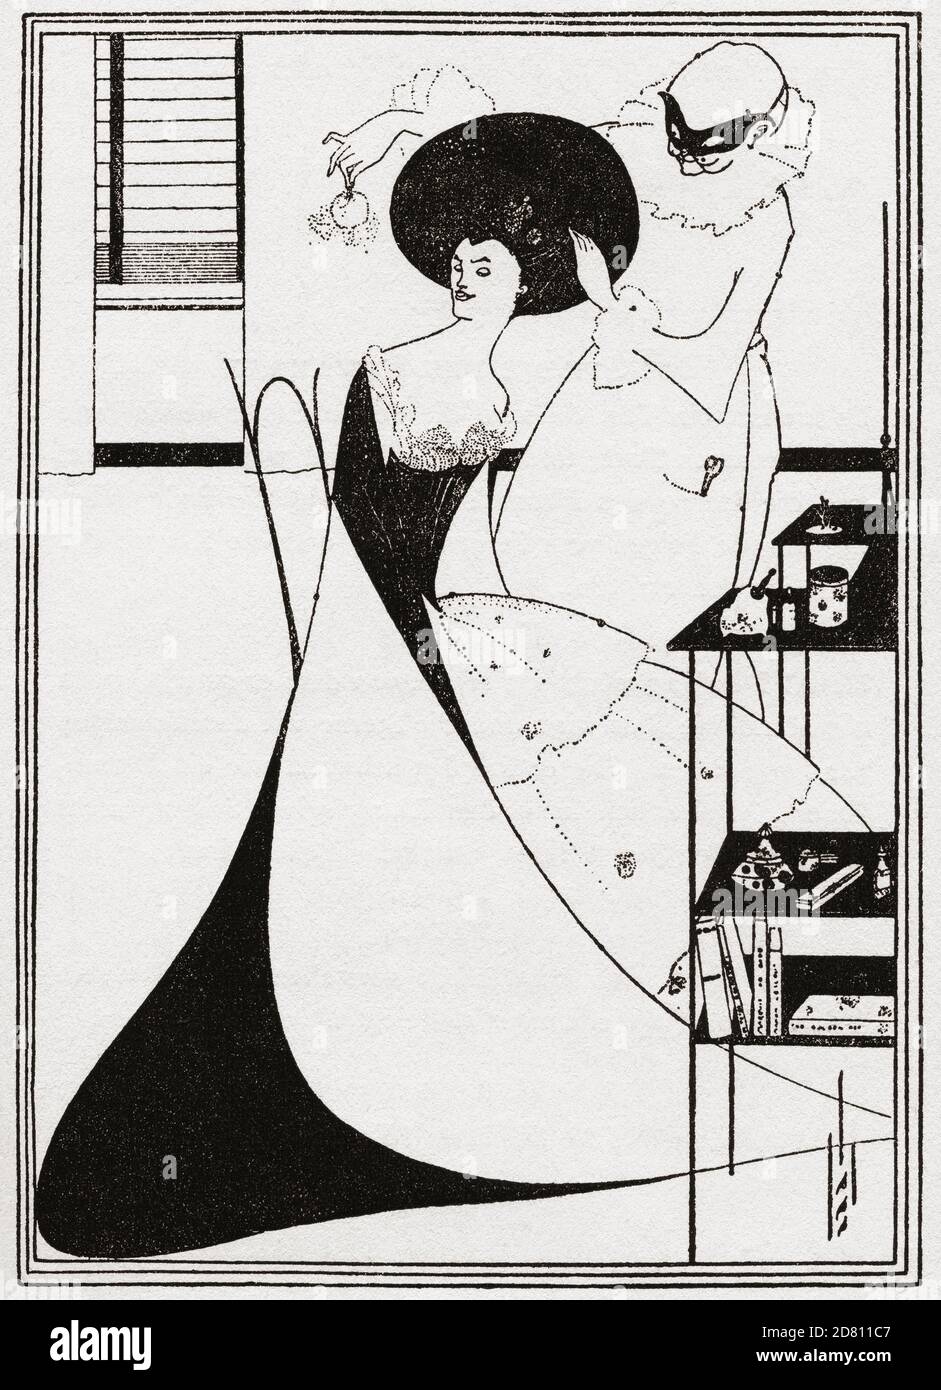 The Toilette of Salome.  Illustration by Aubrey Beardsley for the English edition of Oscar Wilde's play Salome, published 1910. Stock Photo